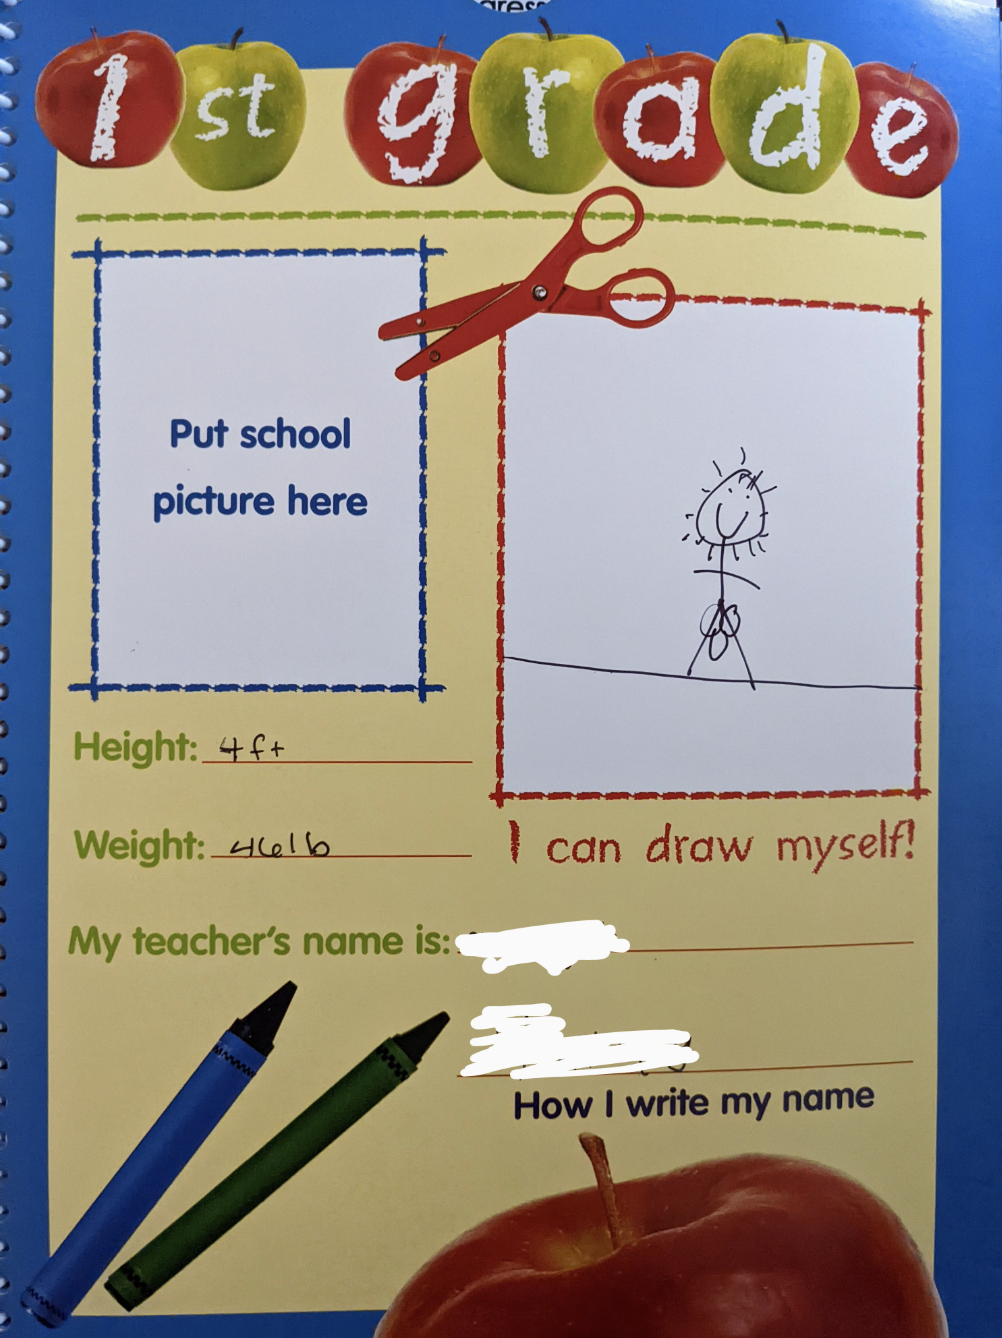 paper - 1st grade Put school picture here I can draw myself! How I write my name Height 4f Weight b My teacher's name is